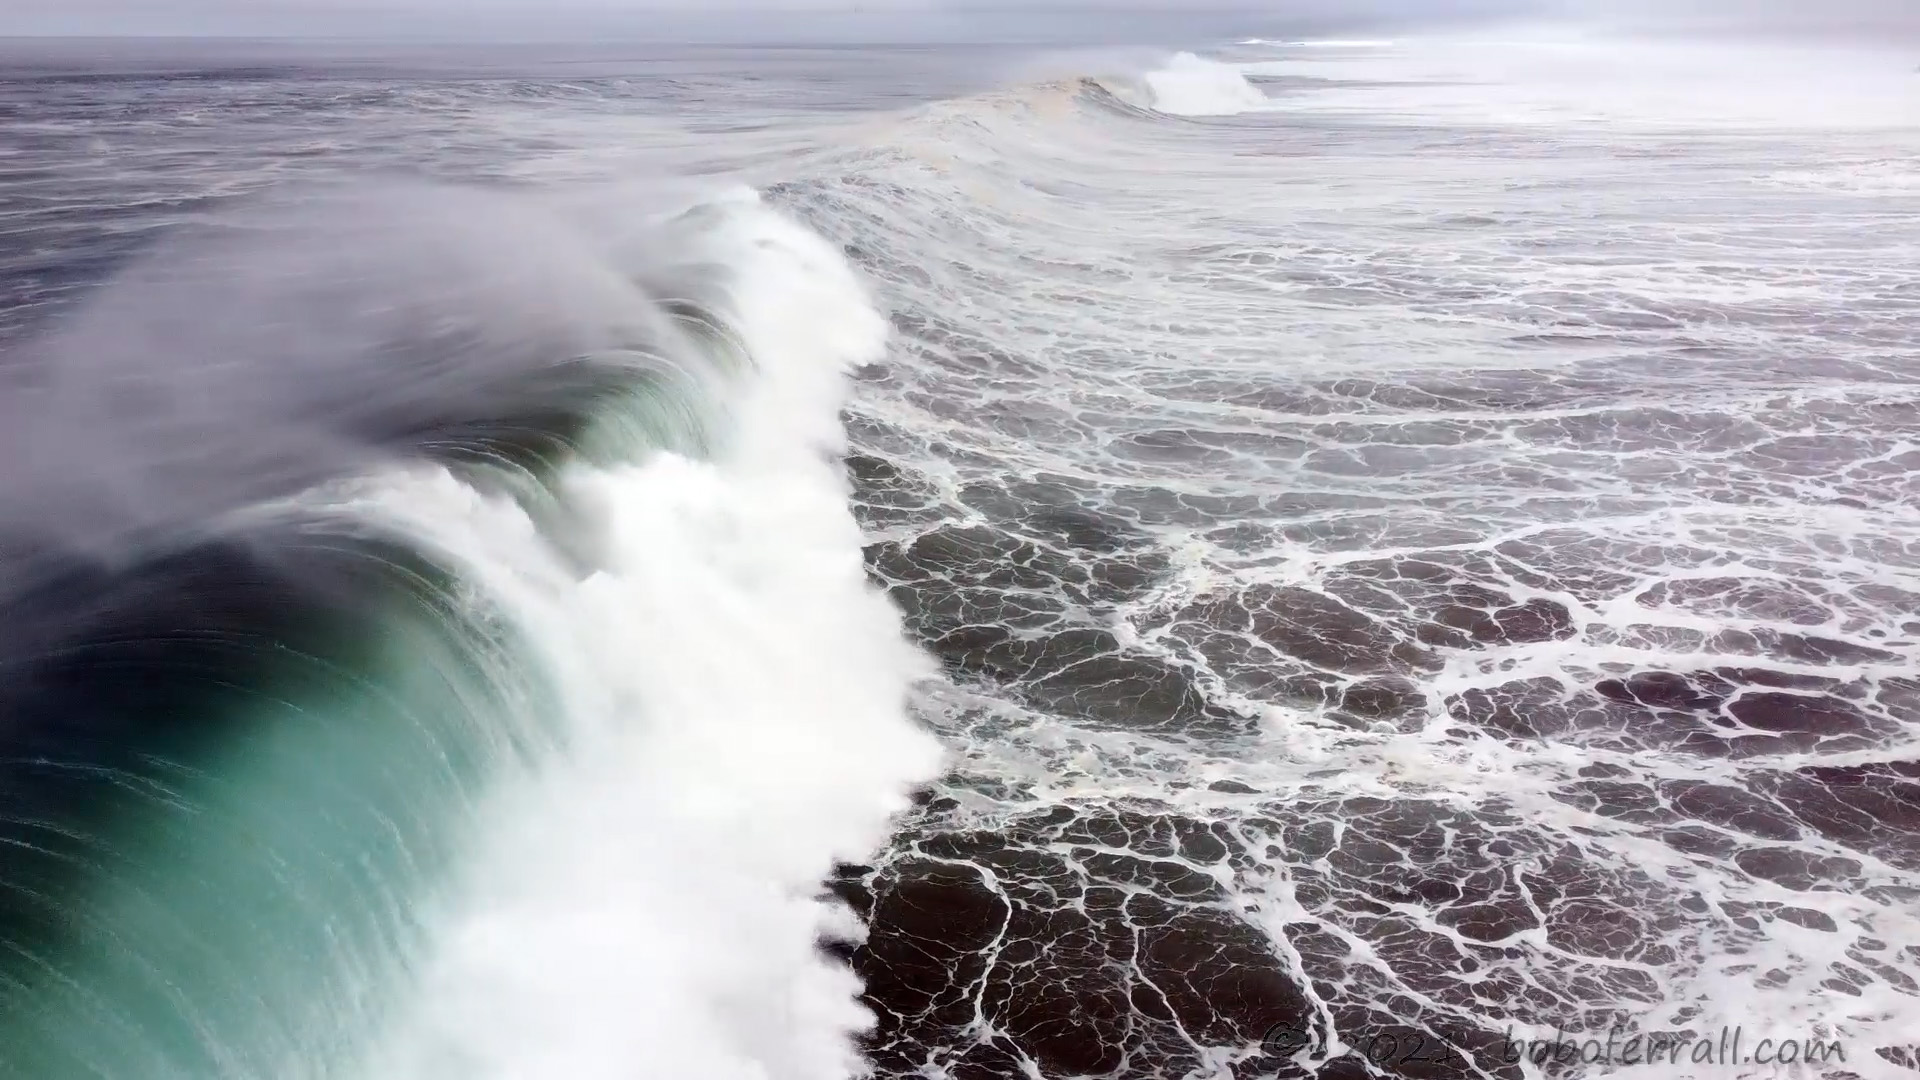 PM1-1733, Beautiful Pacific Ocean Wave From January 10th 2021 at Fort Bragg, Ca, USA By Robert OFerrall